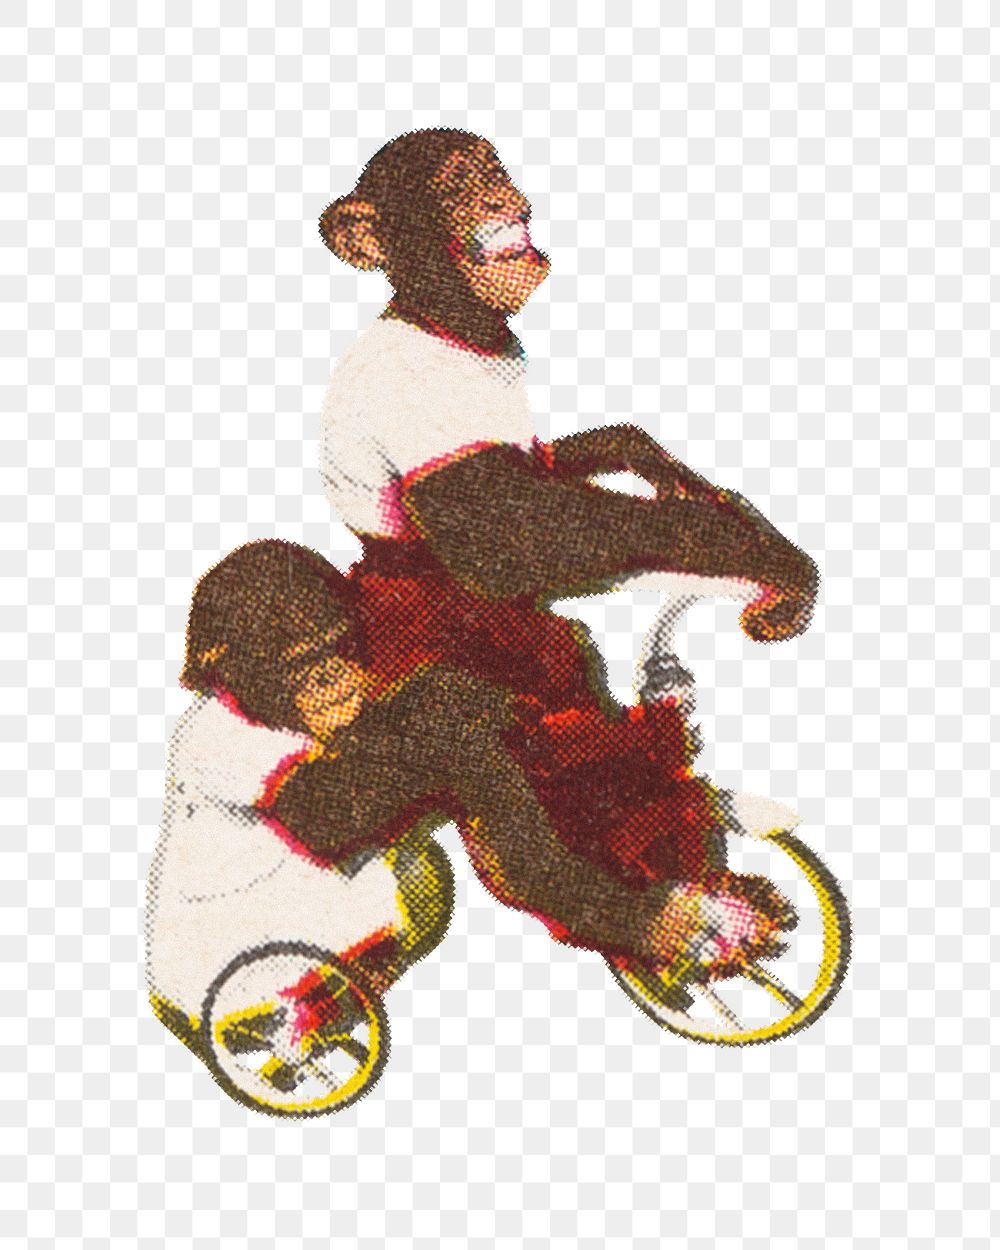 Chimpanzees riding tricycle png, animal illustration on transparent background. Remixed by rawpixel.